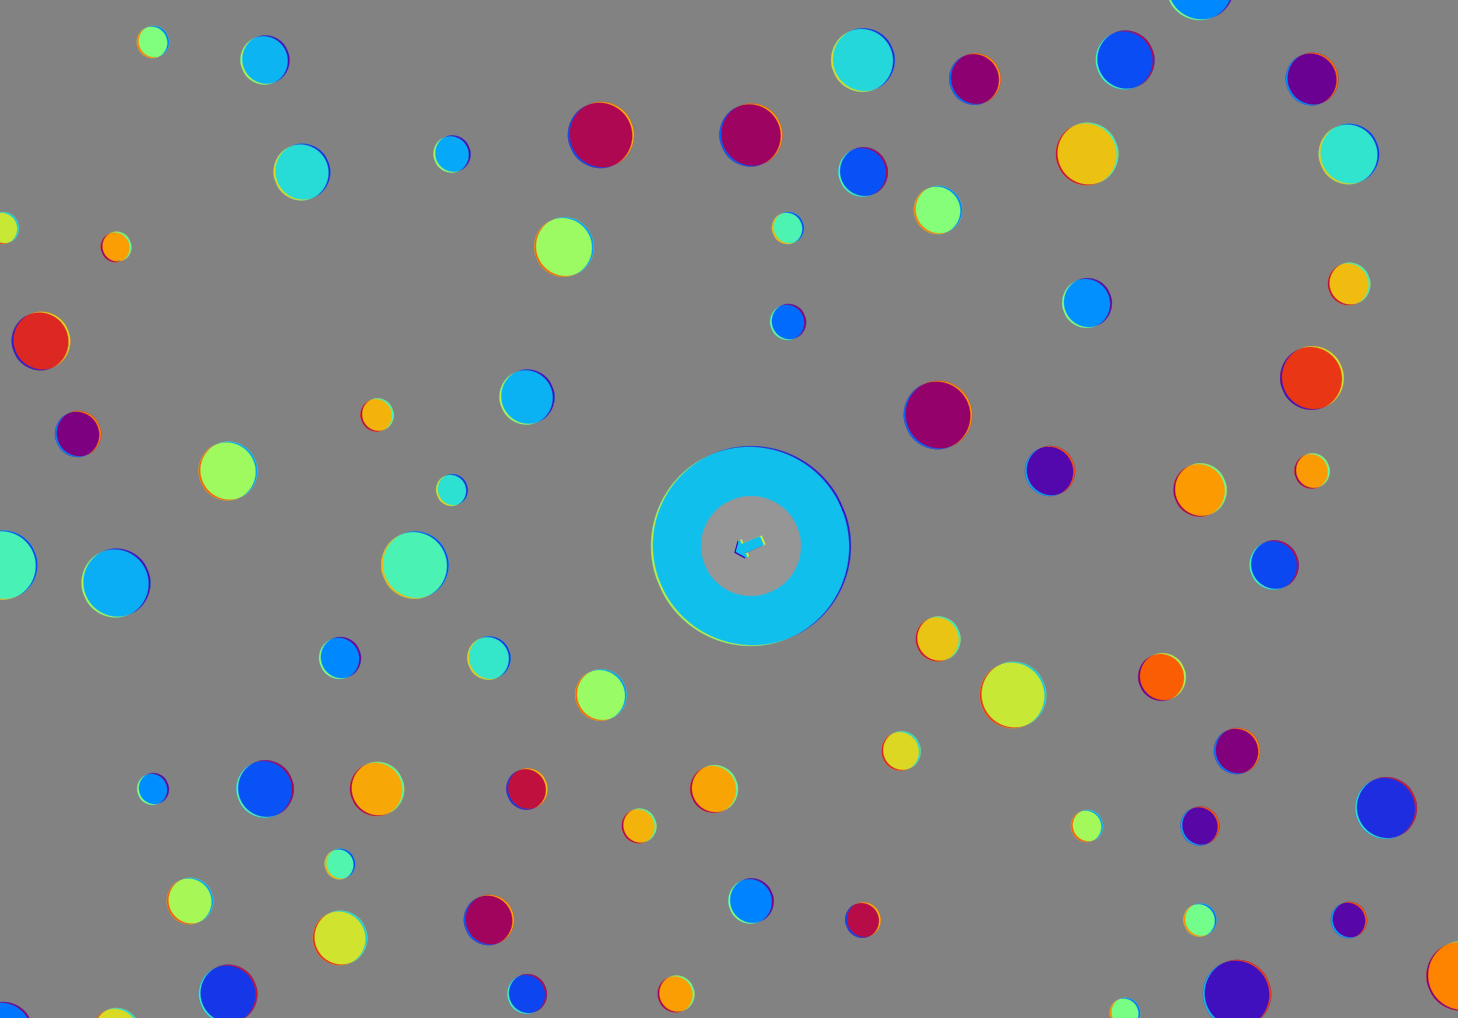 Many colorful dots on a gray background.